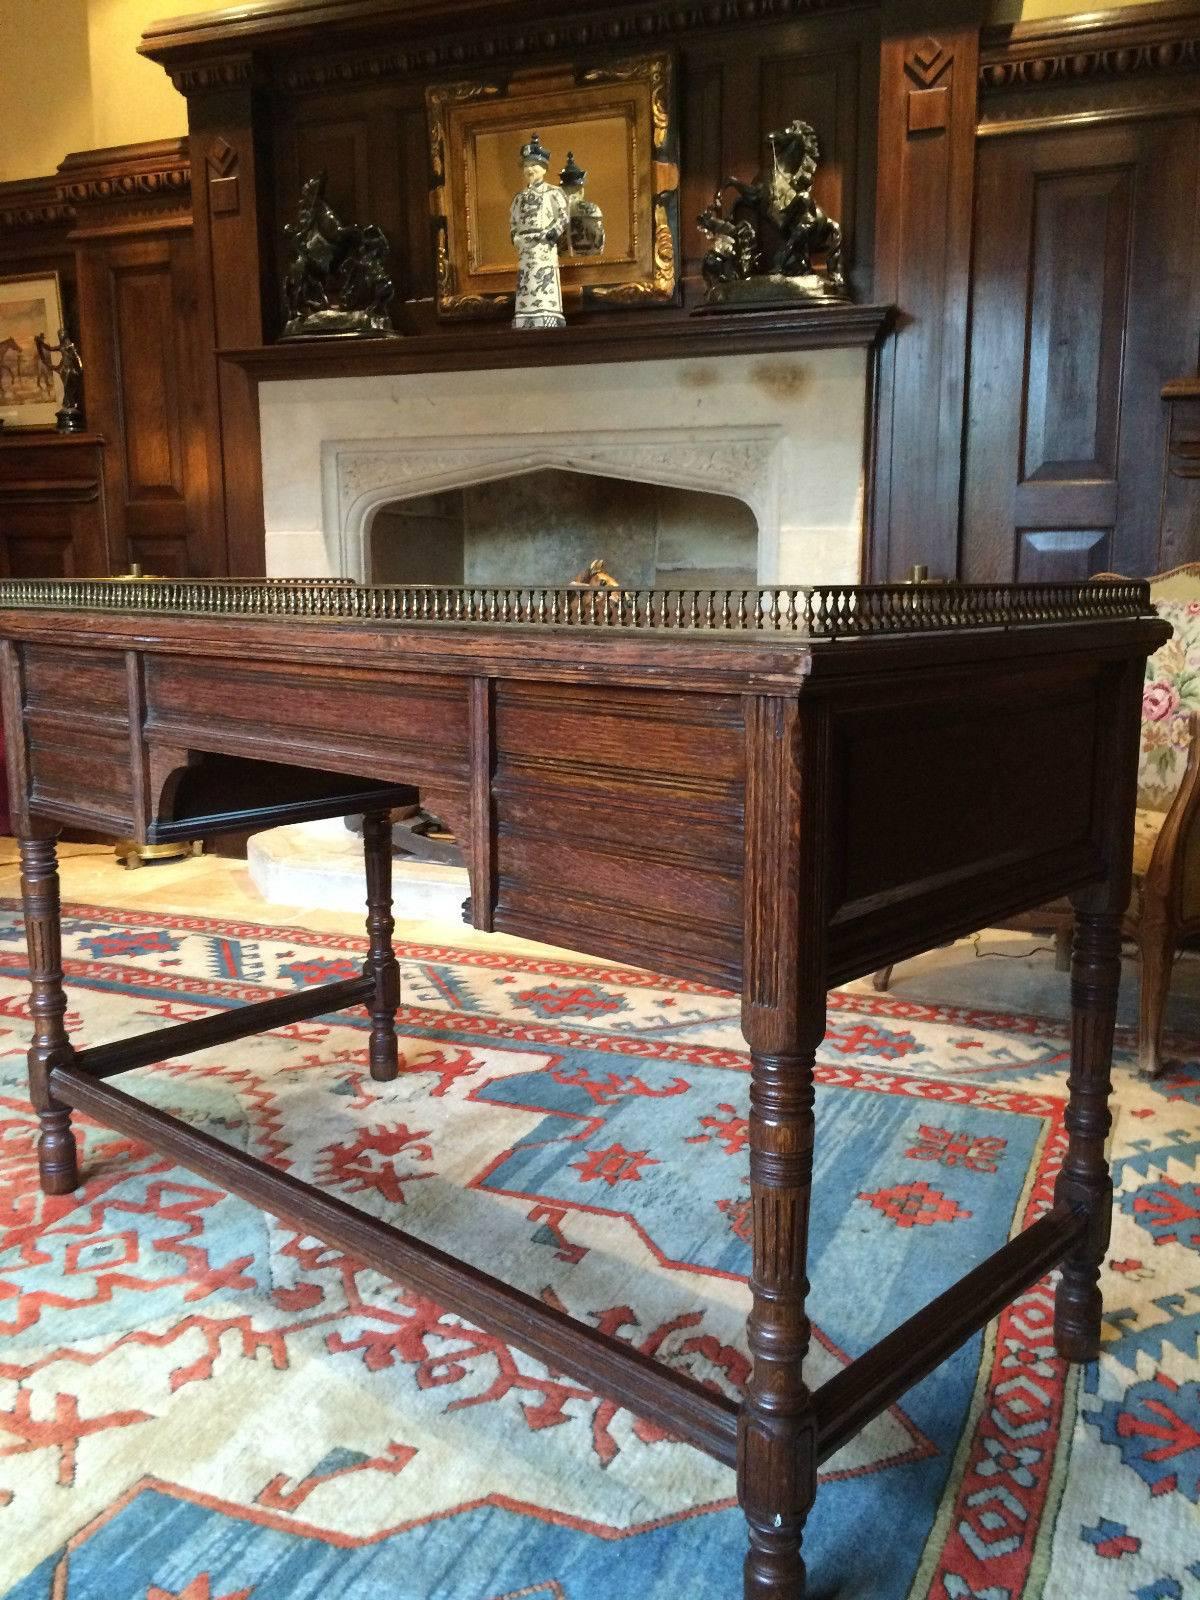 Every antique enthusiast has heard of the name Gillows, due to the very high standard of craftsmanship and unique design of the pieces of furniture they constructed. Robert Gillow was the founder of Gillows and began cabinet making and finishing